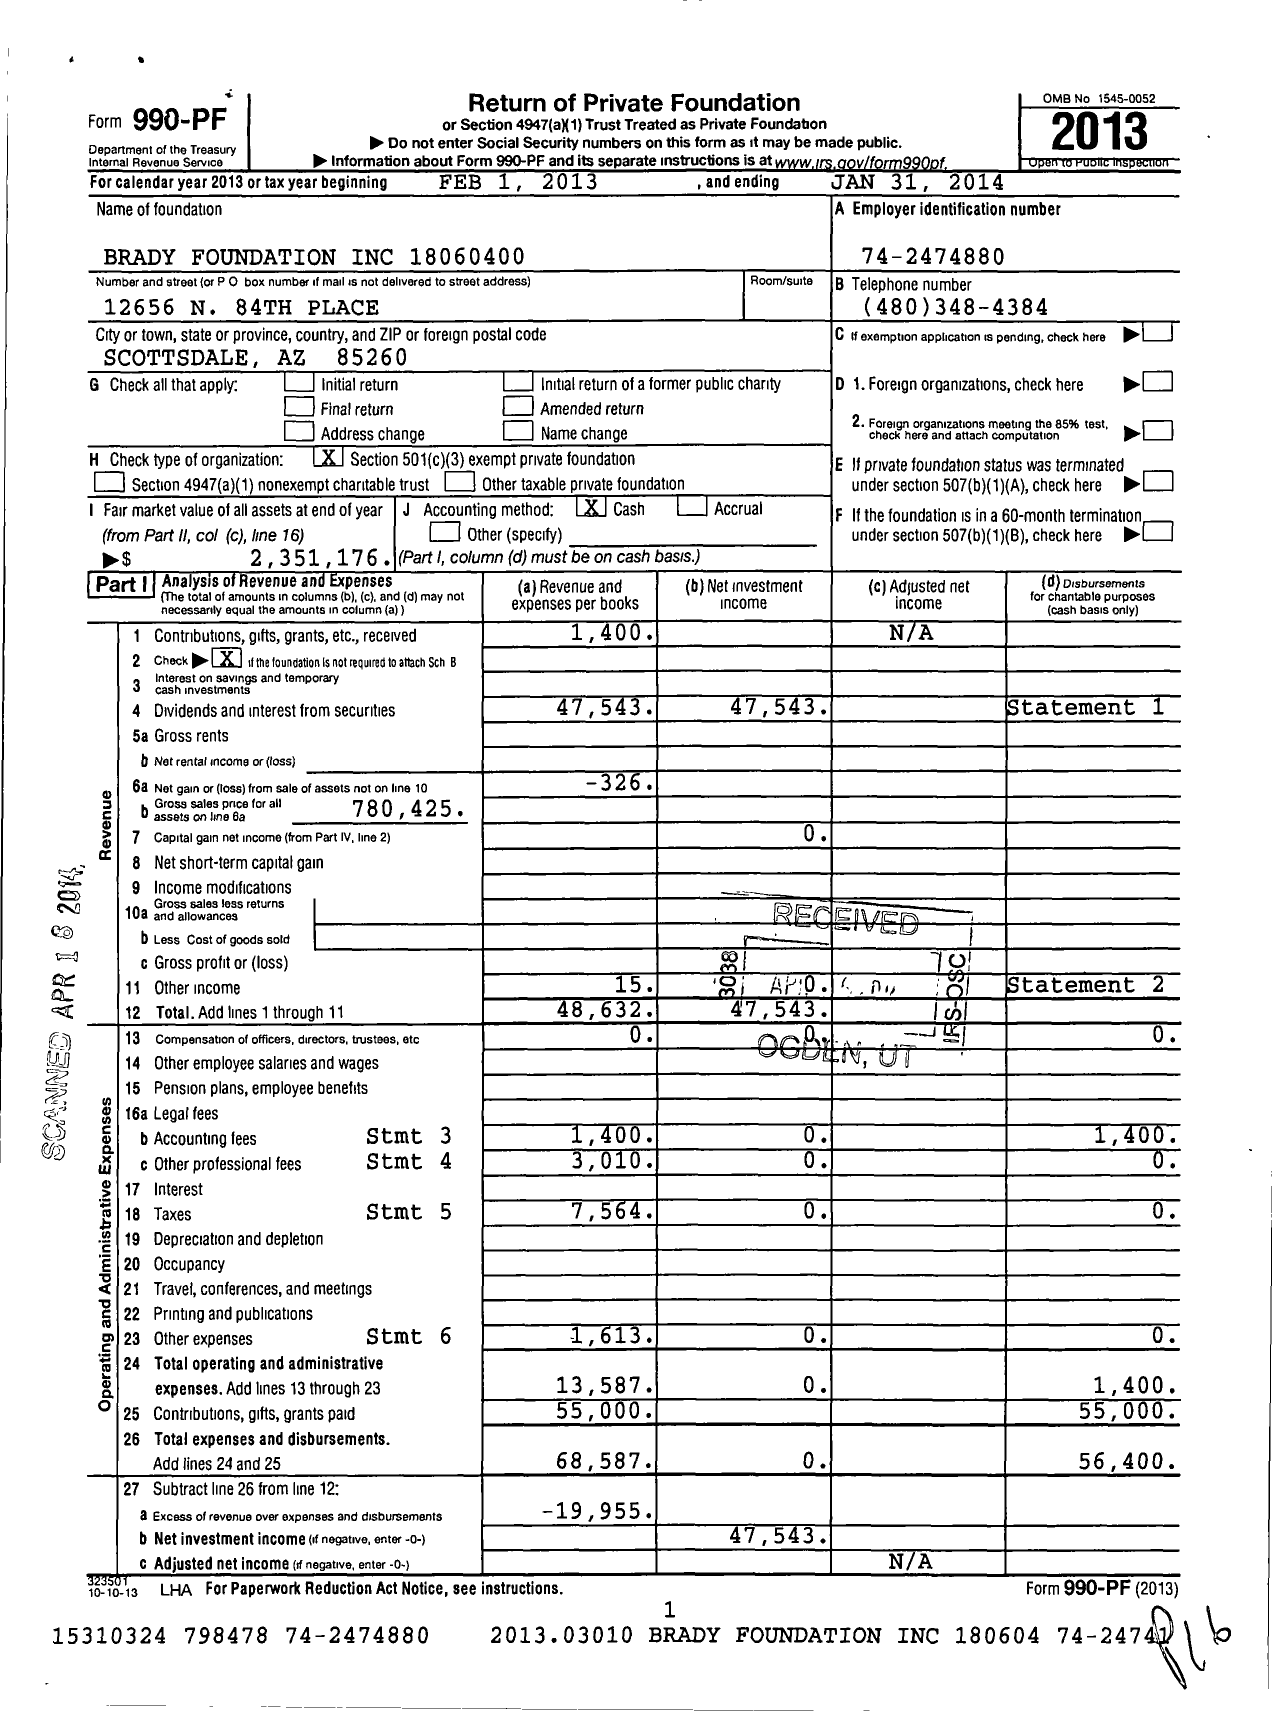 Image of first page of 2013 Form 990PF for Brady Foundation / 2329 18060400